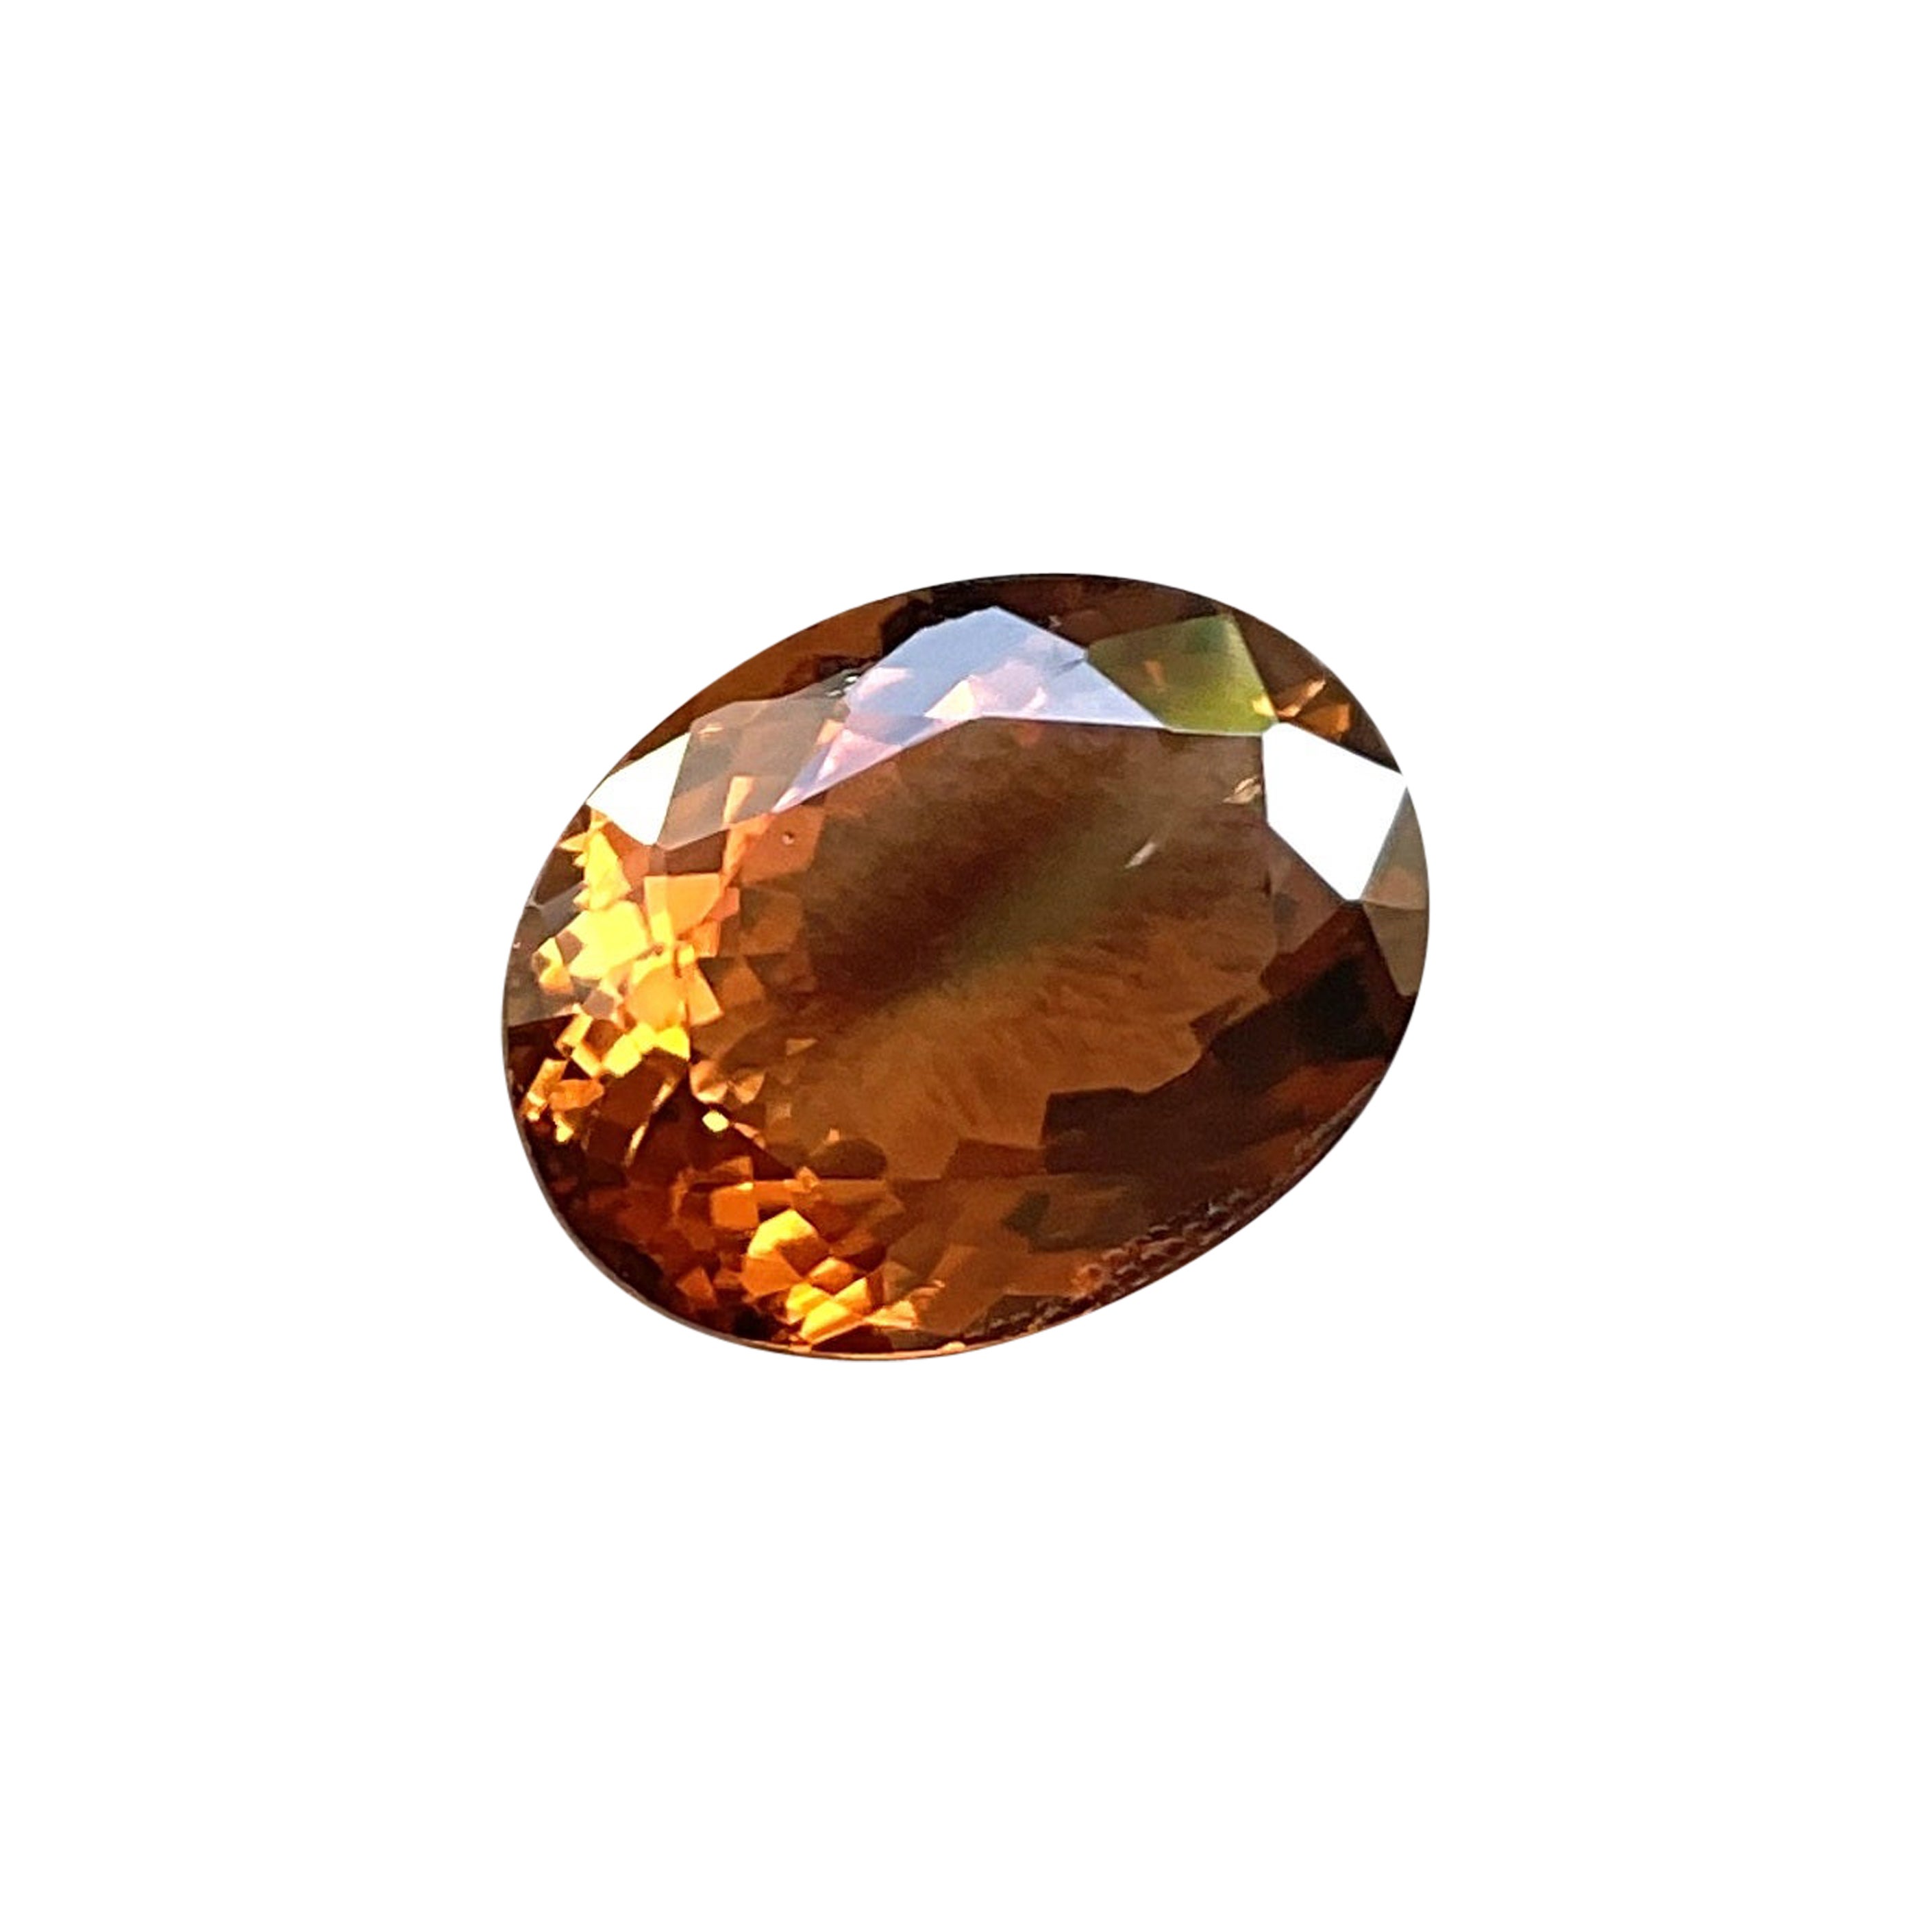 11.90 Carats Orange Brown Tourmaline Oval Faceted Cut Stone Natural Gemstone For Sale